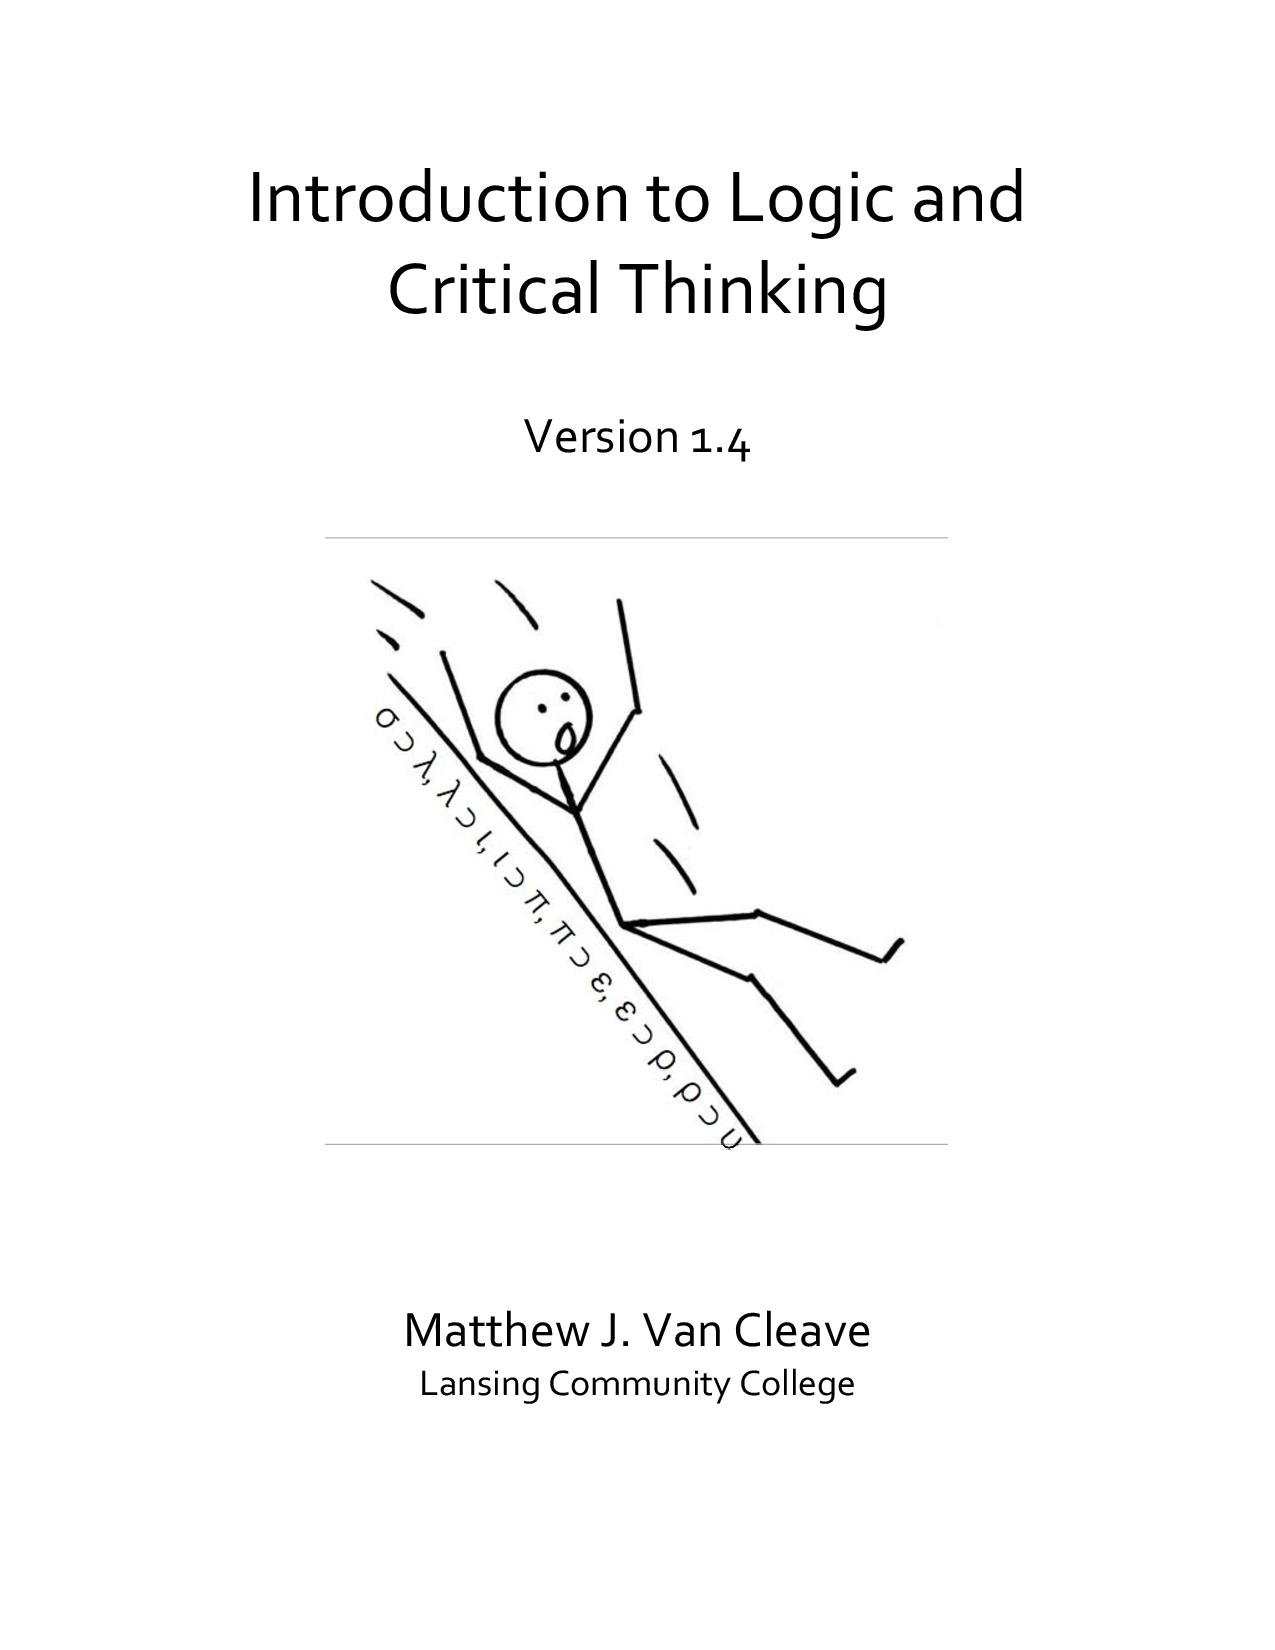 introduction to logic and critical thinking by merrilee h. salmon